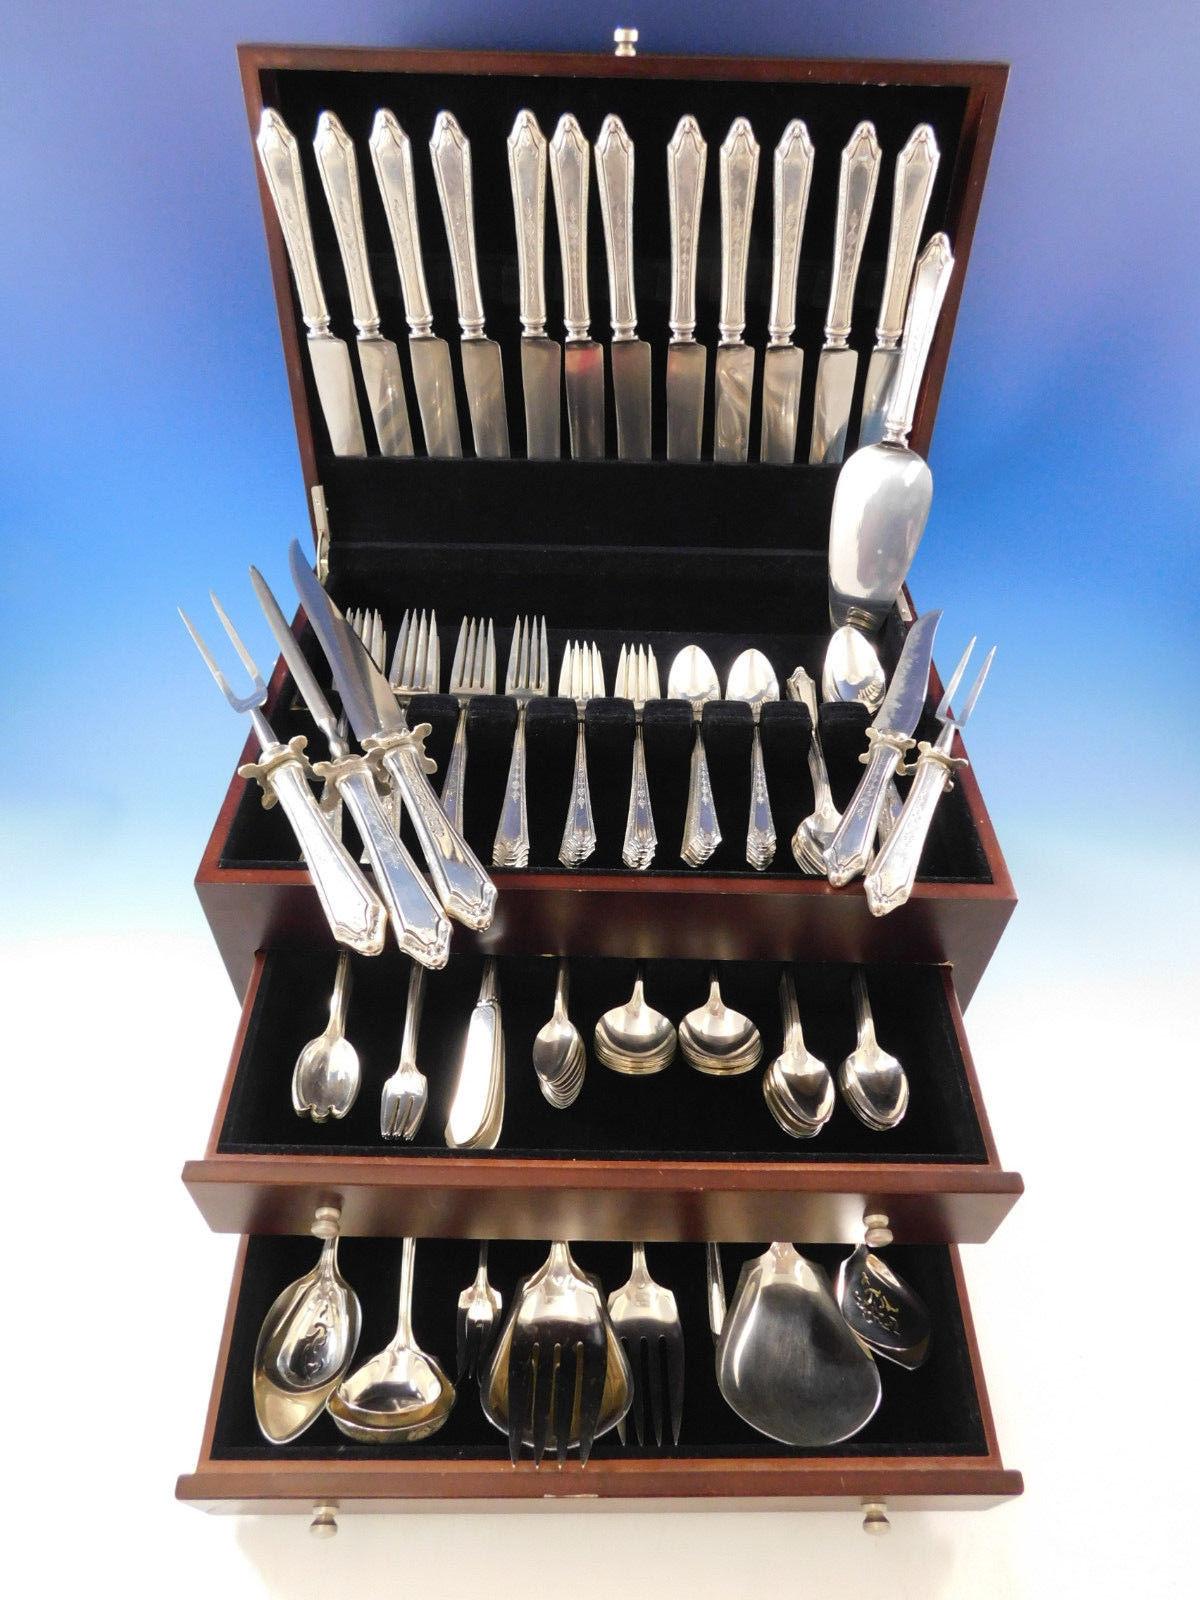 Monumental dinner size Virginia Lee by Towle sterling silver flatware set of 162 Pieces. This scarce set includes:

12 dinner size knives, 9 3/4